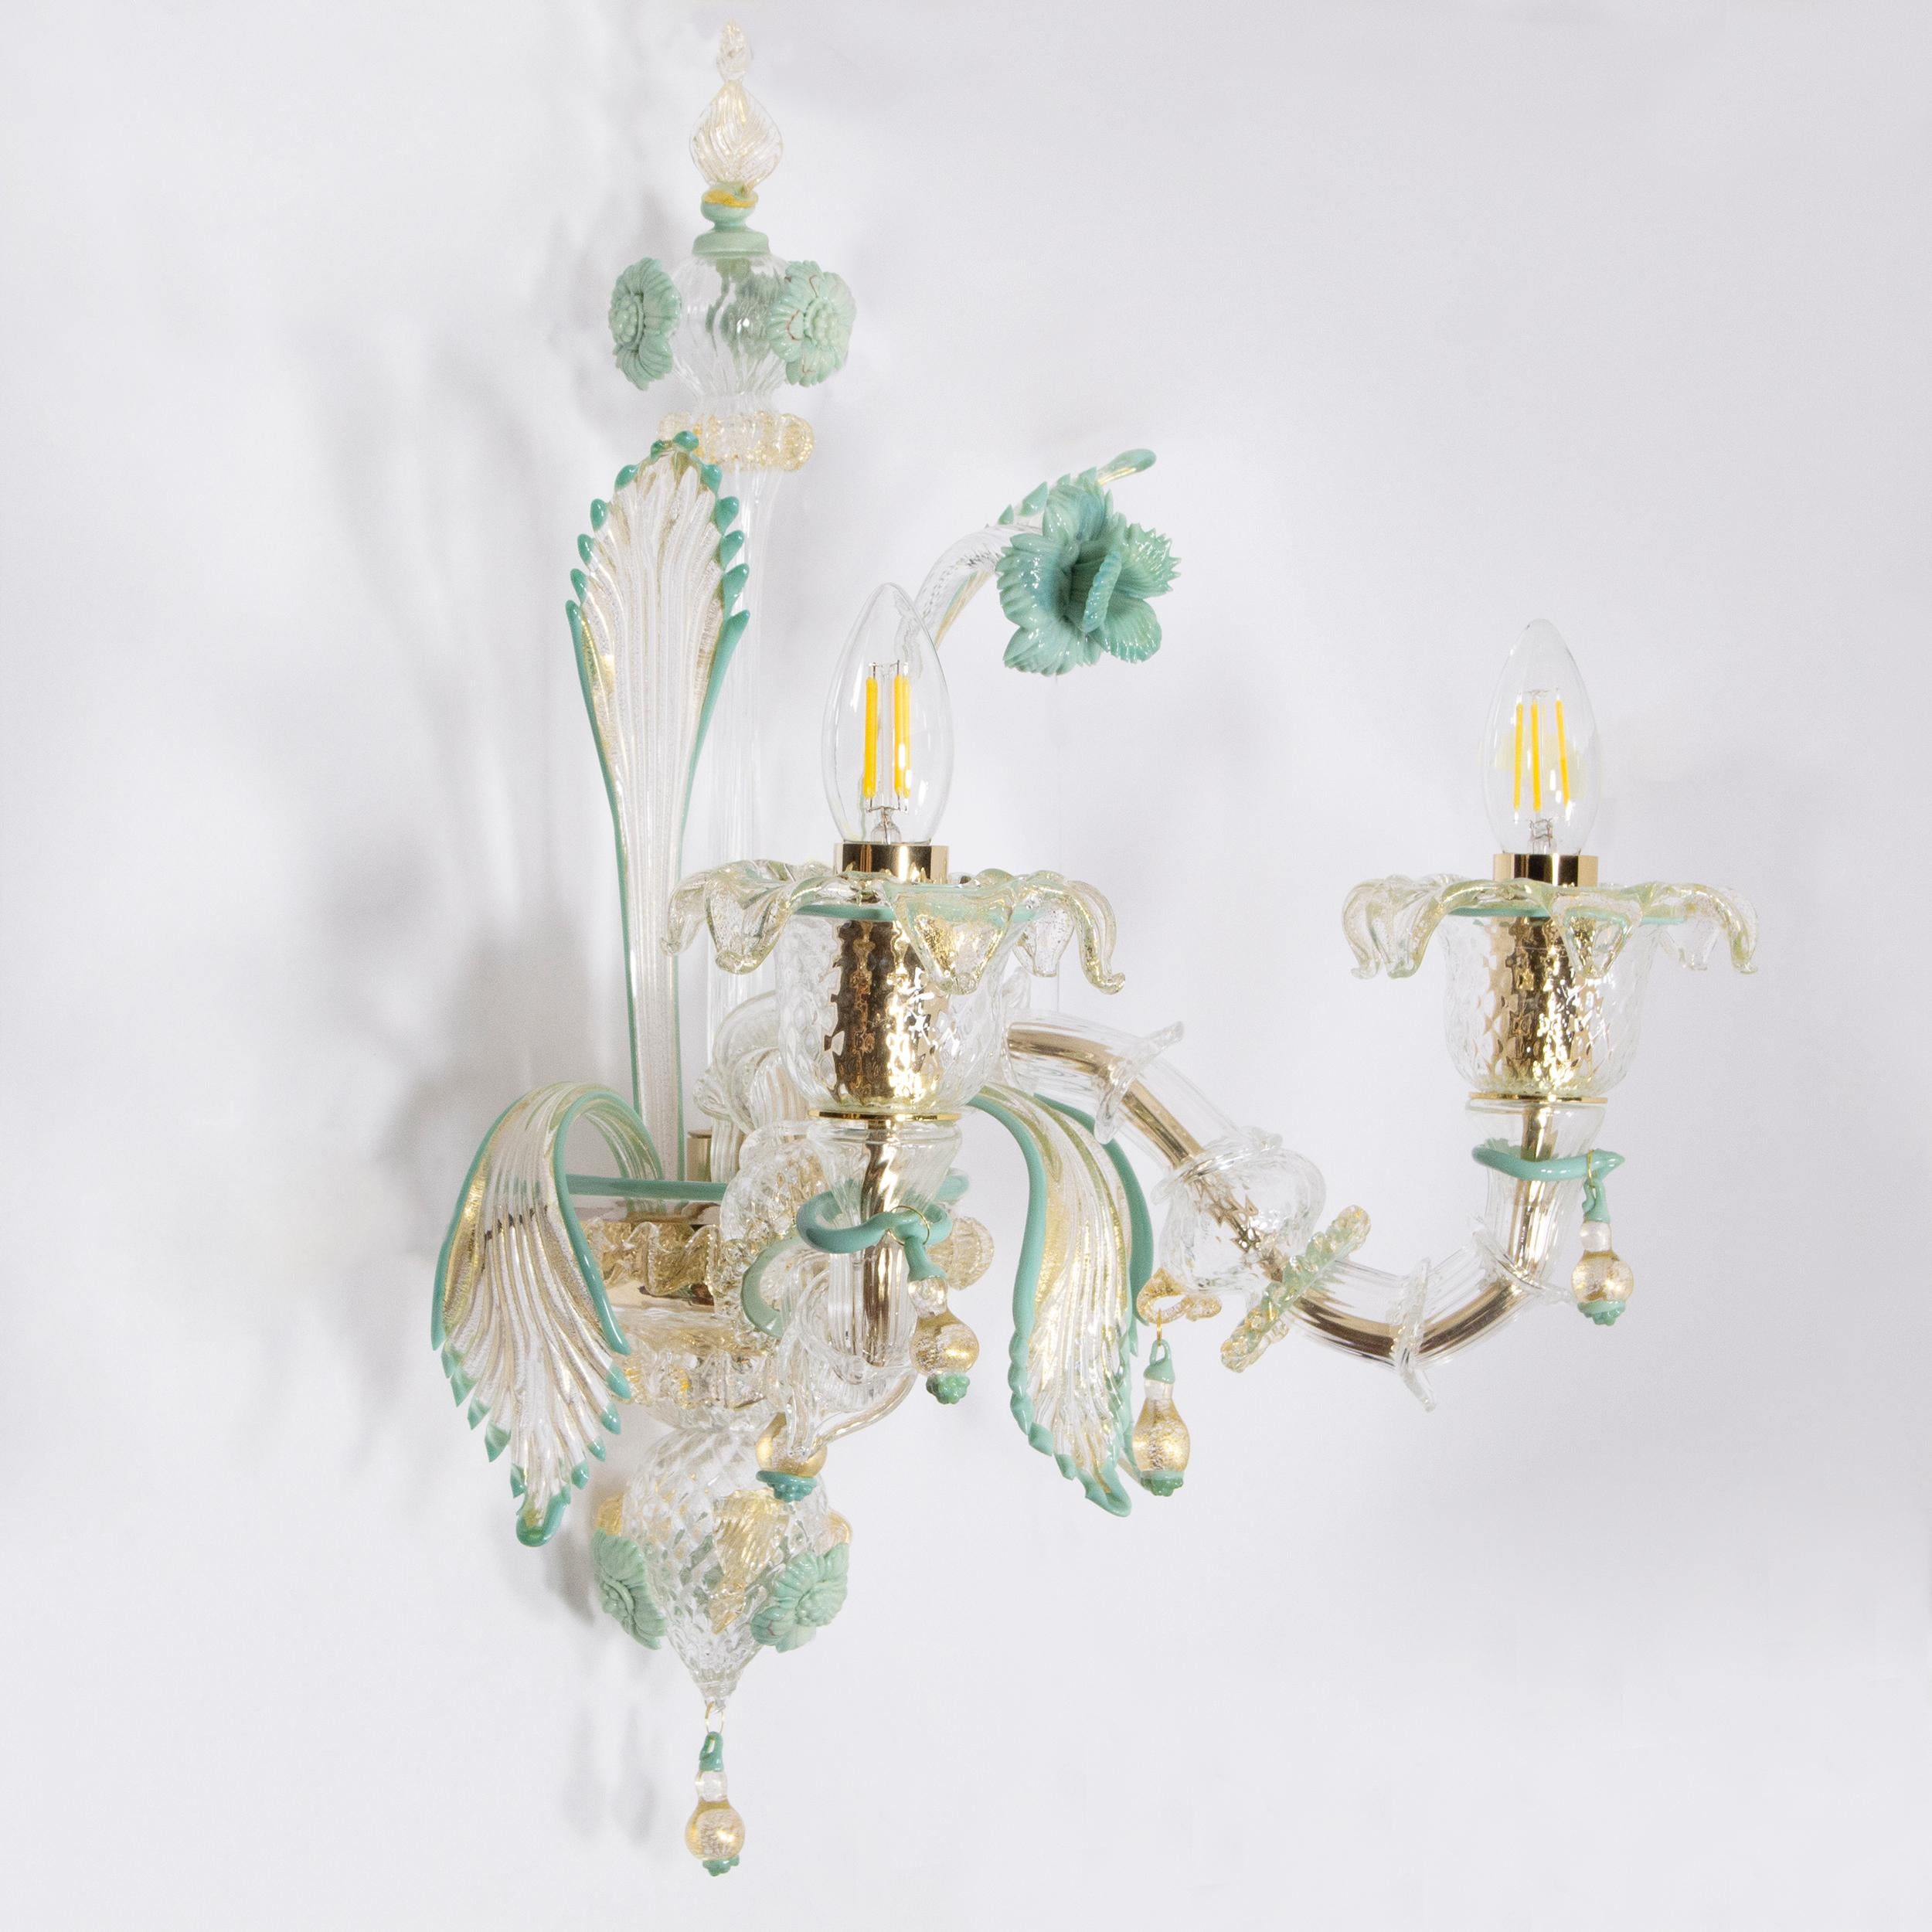 Set of 2 Rezzonico sconce 2 lights, clear Murano glass with gold, grey and green color details in vitreous paste by Multiforme.
This rezzonico sconce is a combination of the traditional Venetian structure with gaudy colors. This sconce is a peculiar